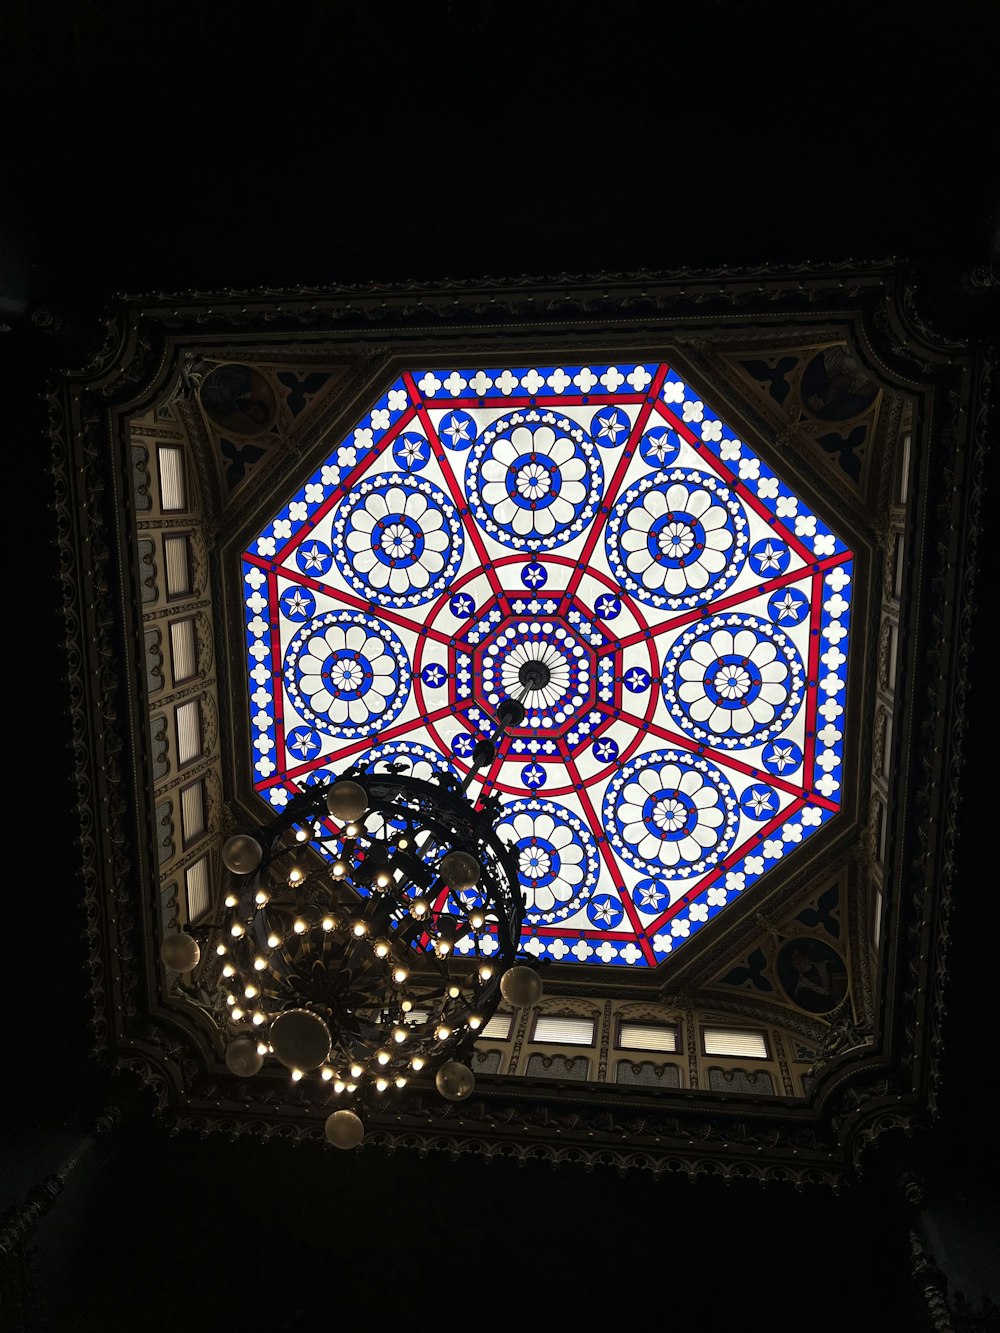 the ceiling of a building with a circular stained glass window